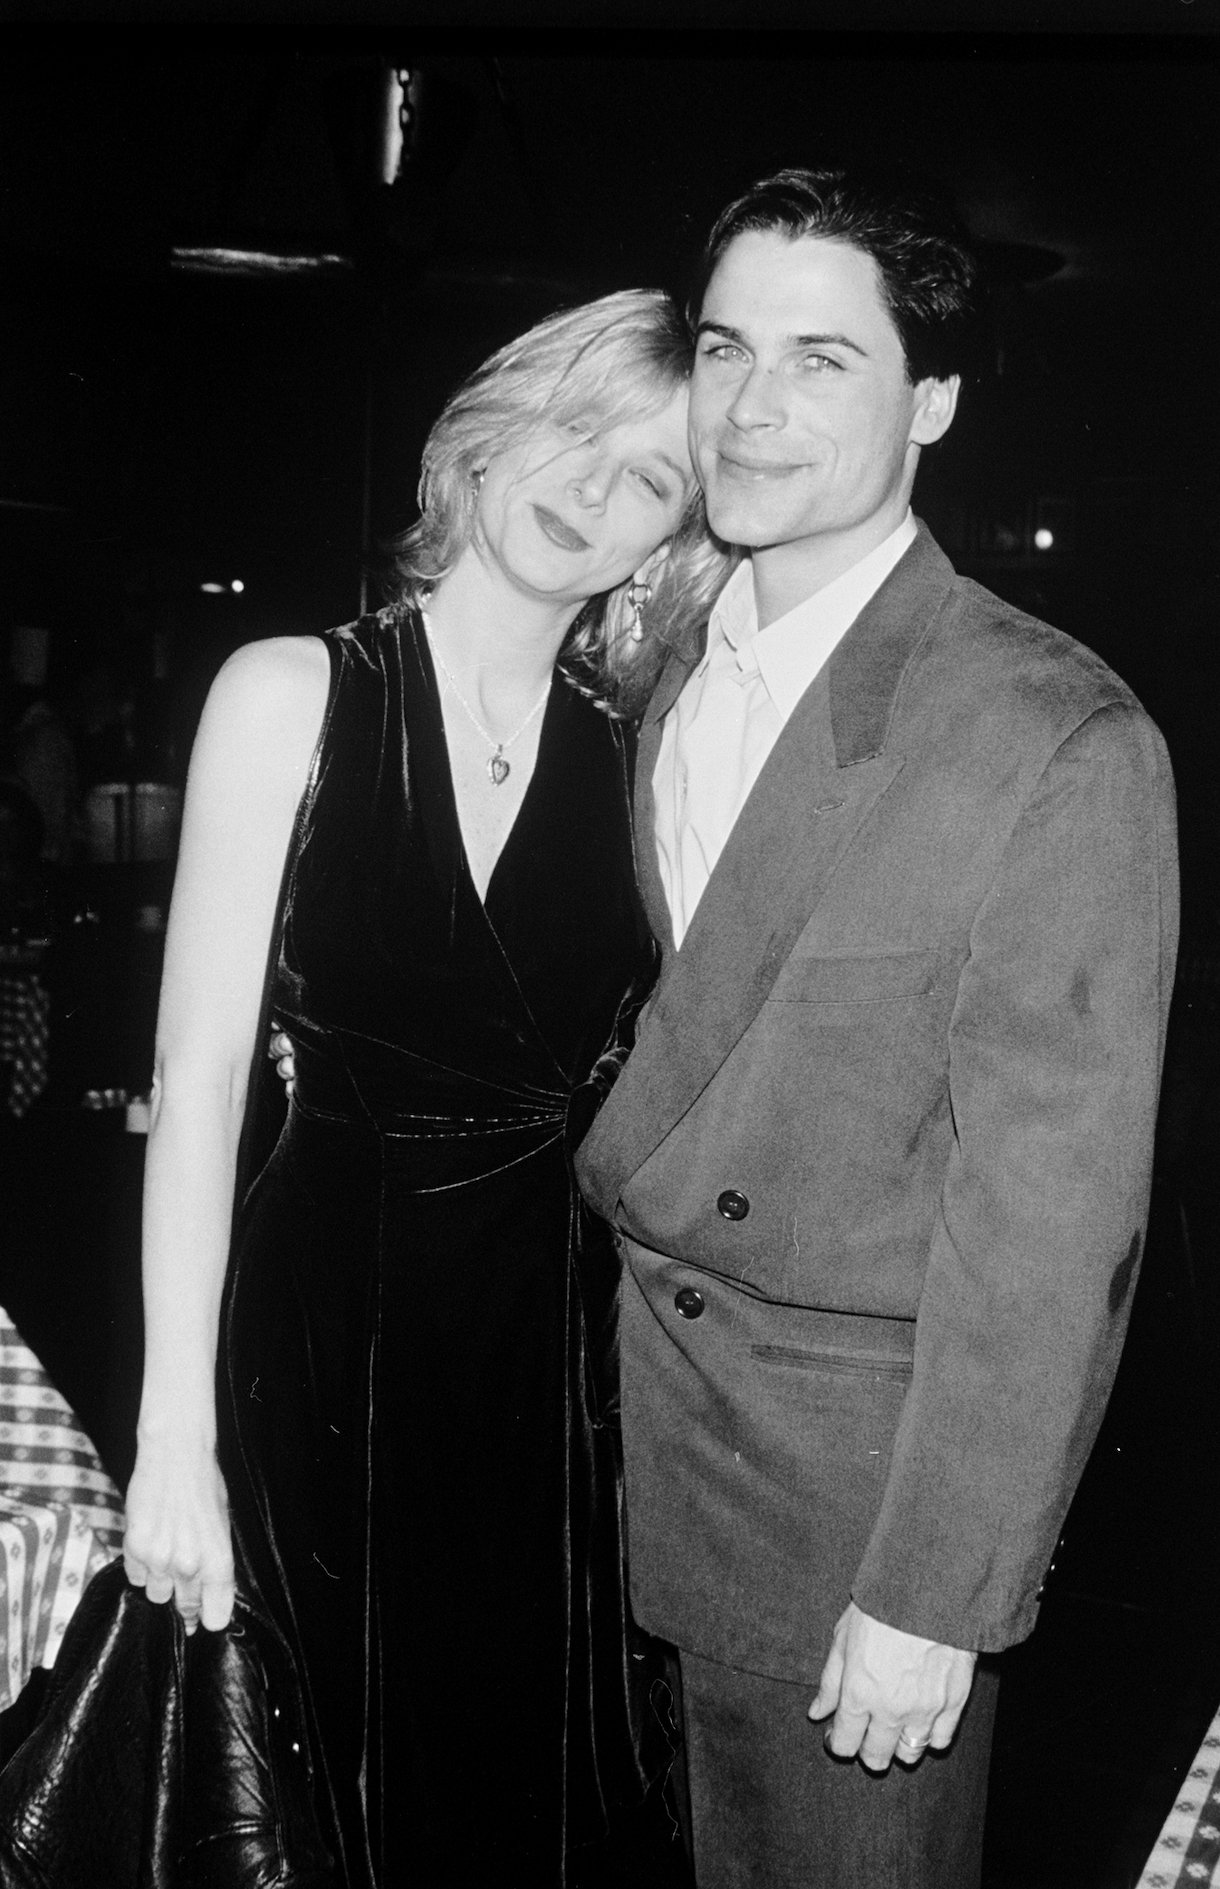 Rob Lowe and wife Sheryl Berkoff